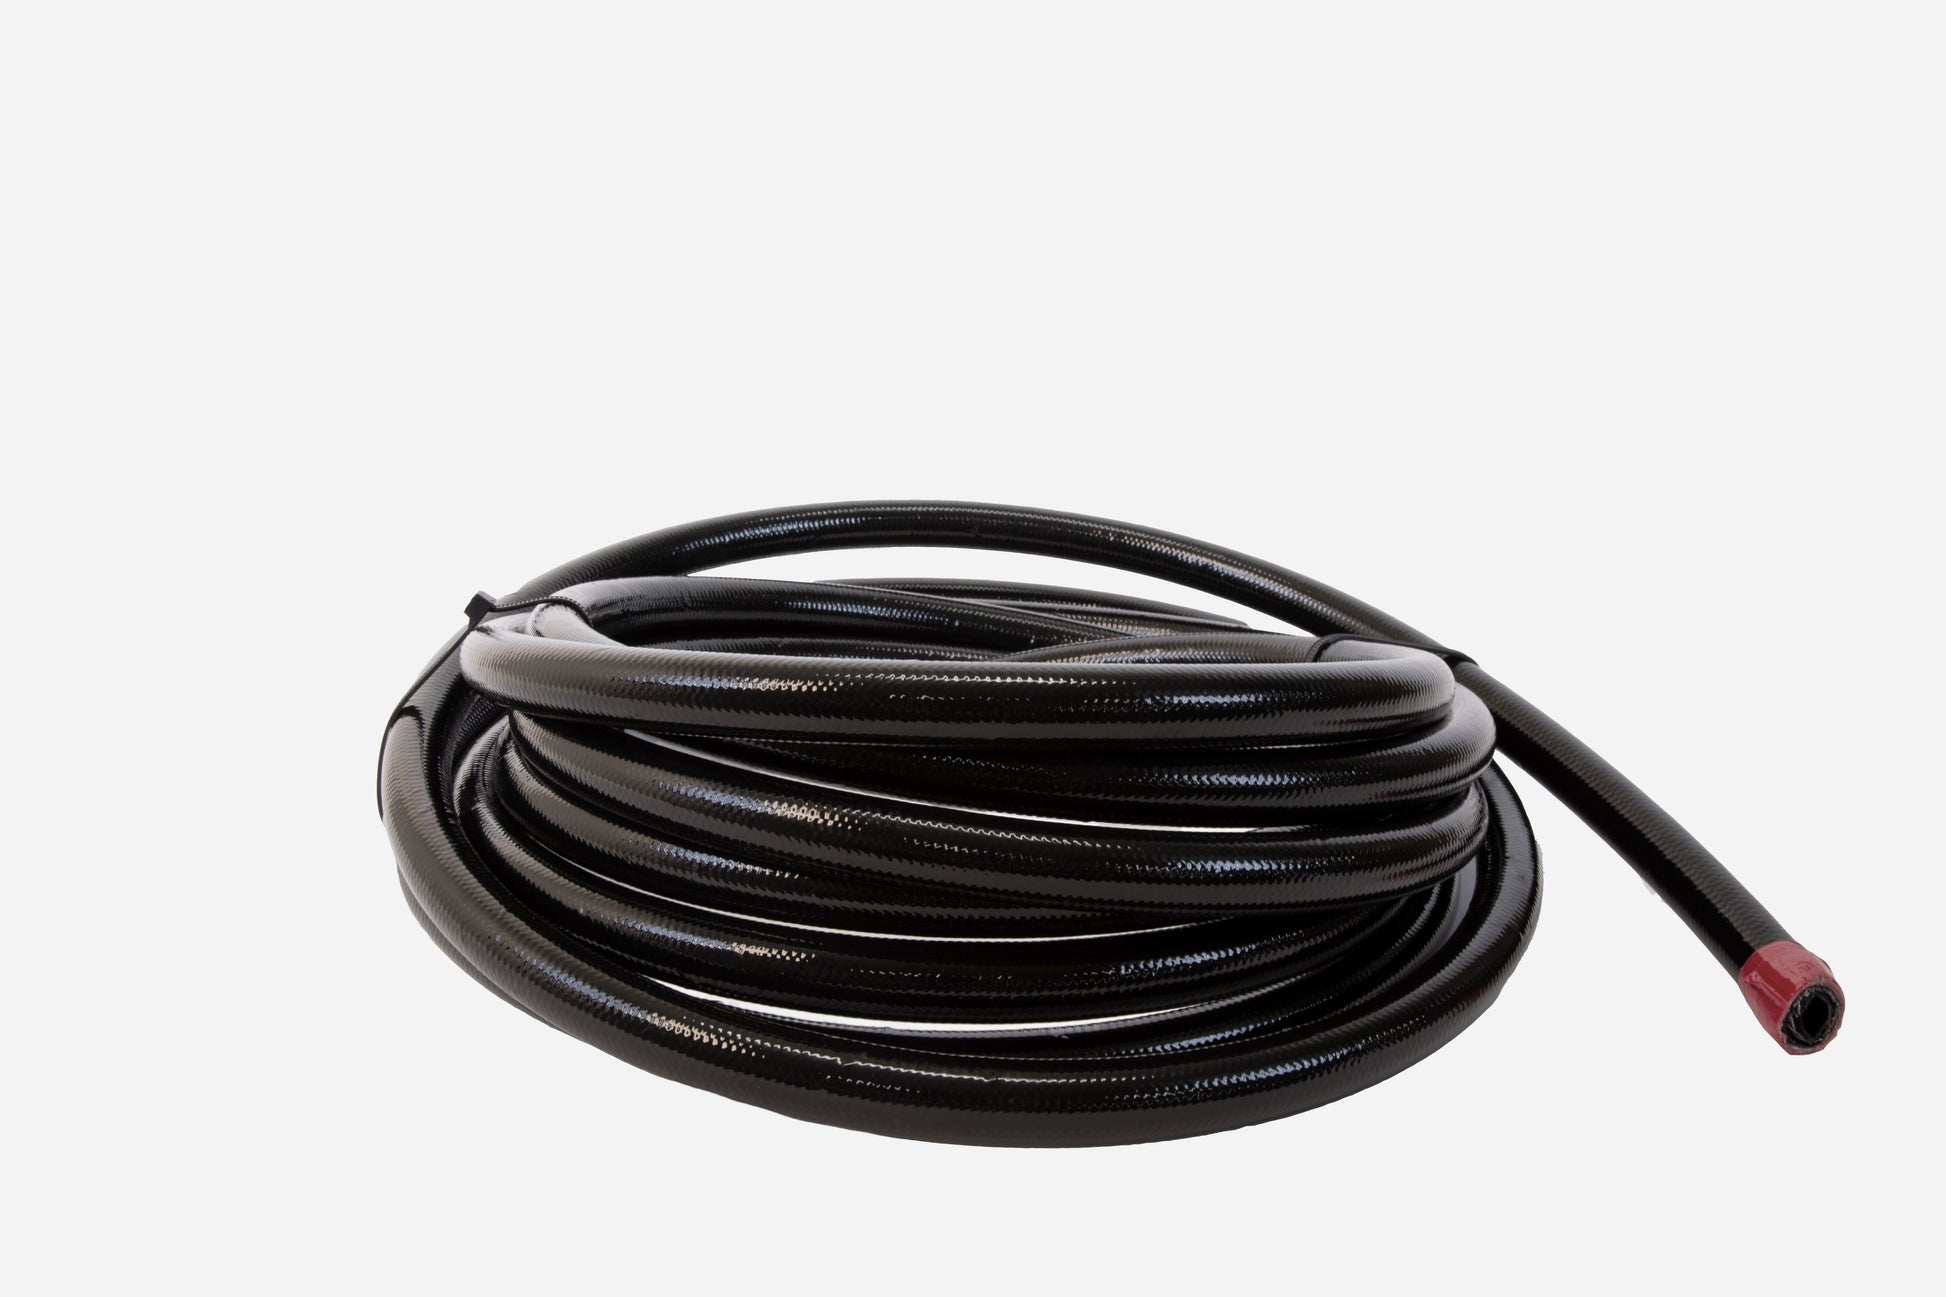 Aeromotive 15326 - PTFE SS Braided Fuel Hose - Black Jacketed - AN-08 x 12ft